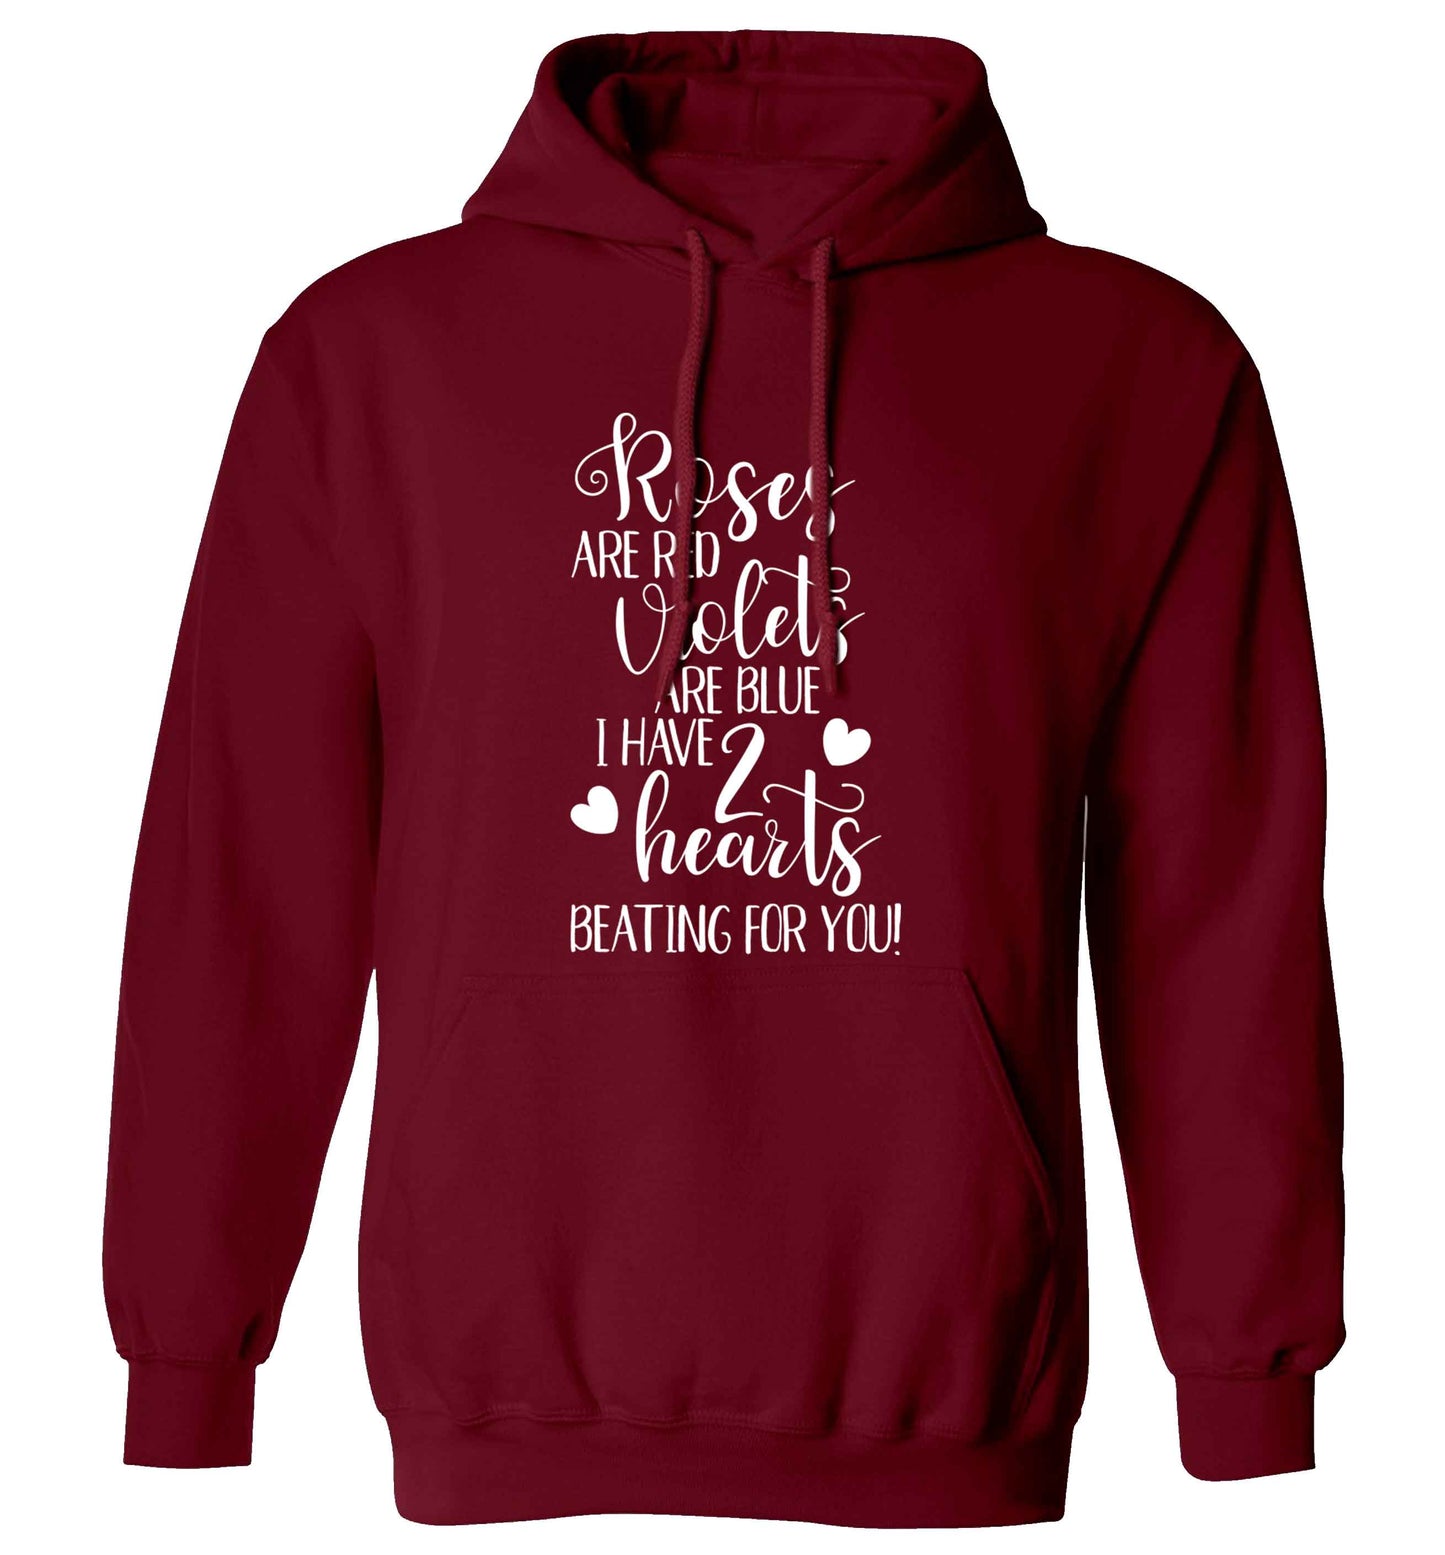 Roses are red violets are blue I have two hearts beating for you adults unisex maroon hoodie 2XL